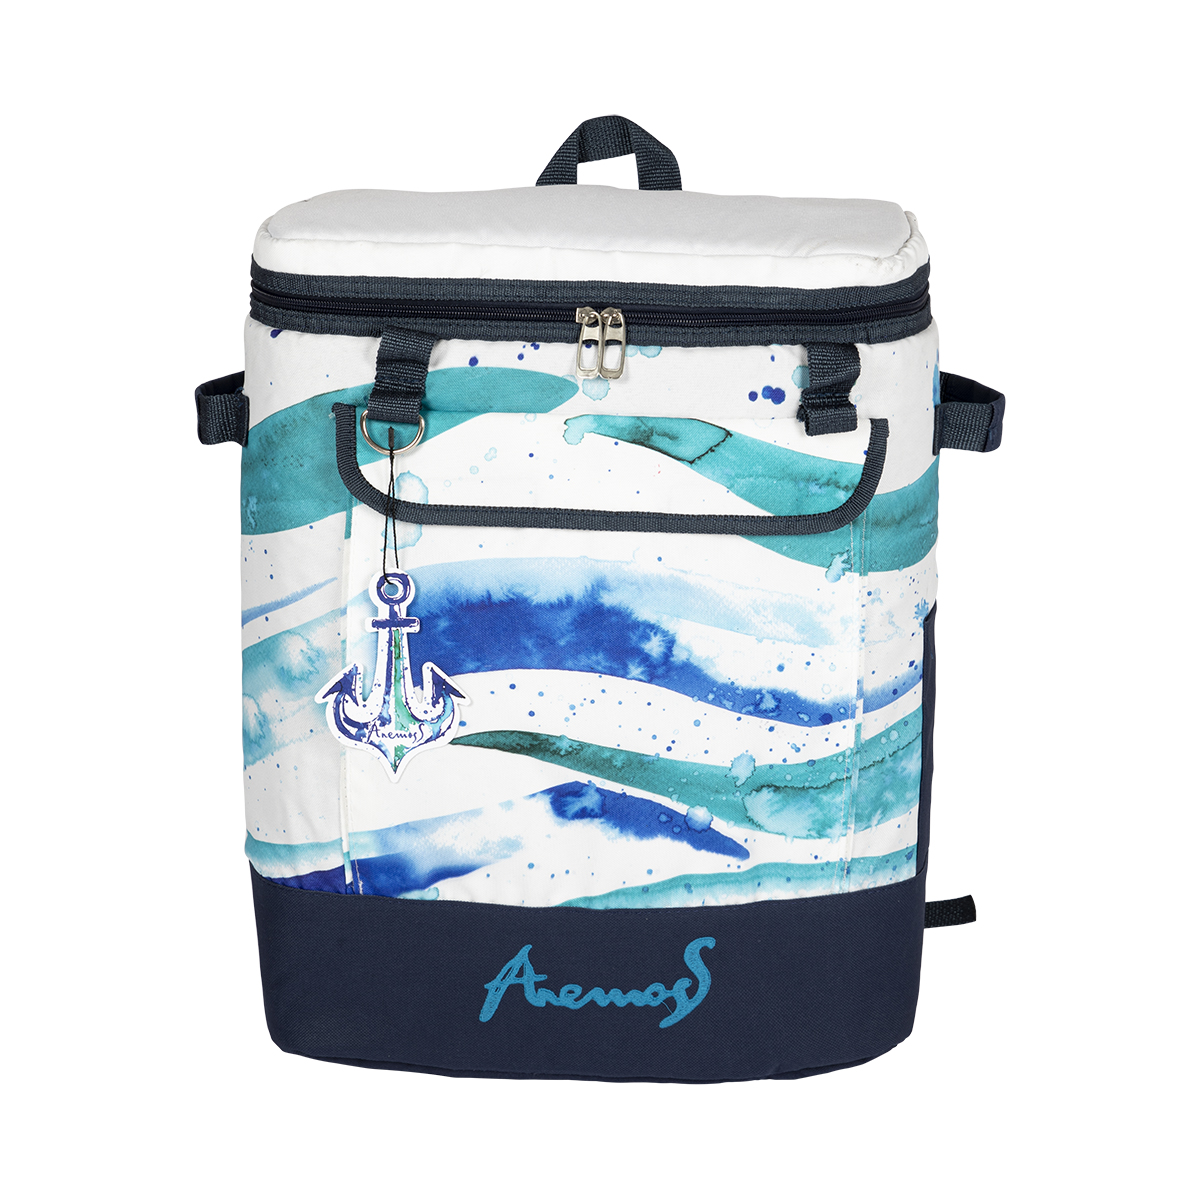 Anemoss waves insulated cooler backpack